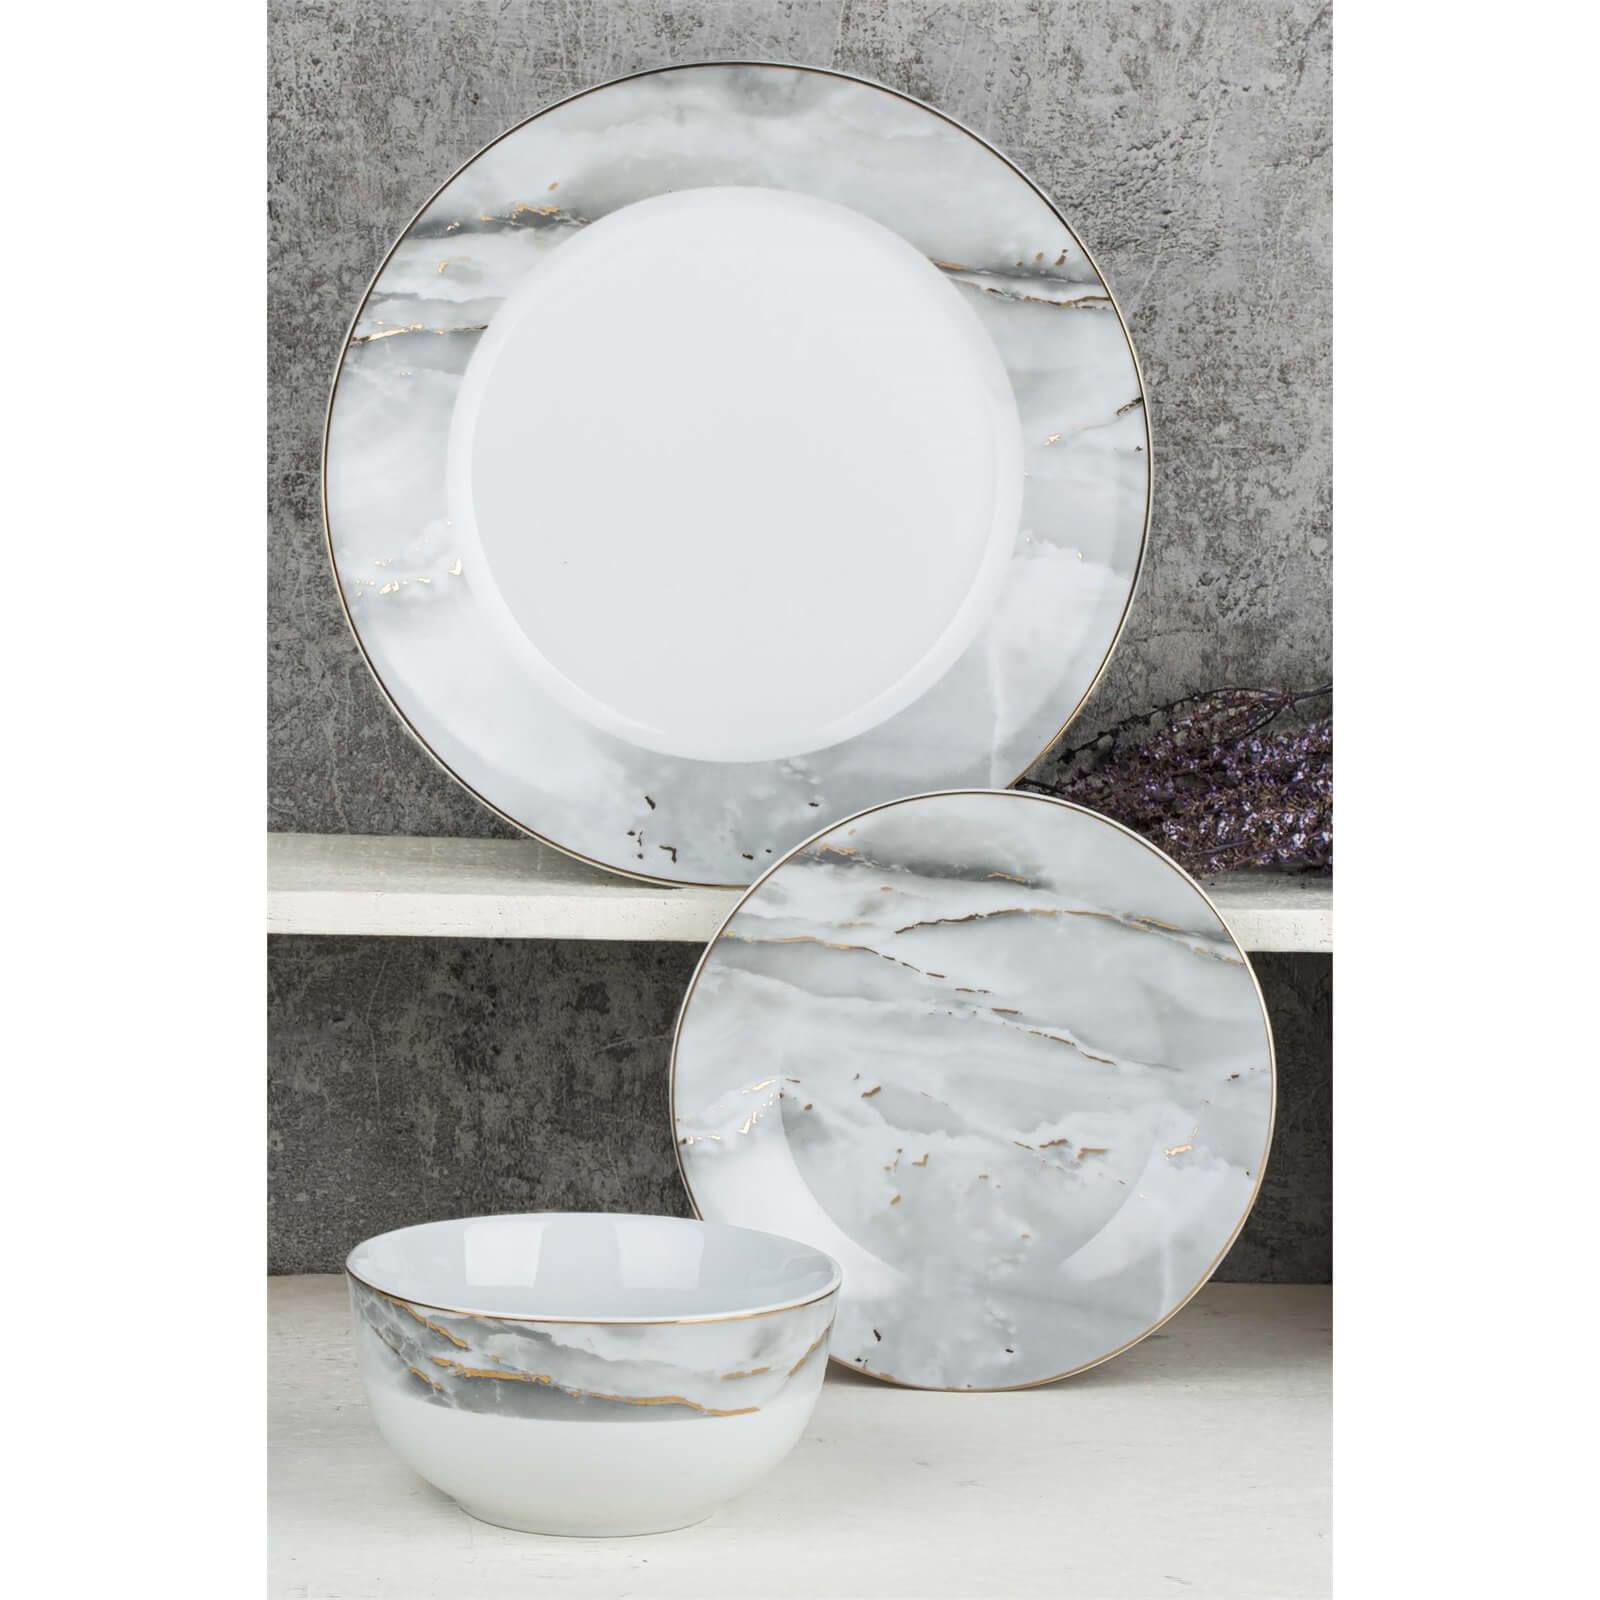 Marble and Gold 12 Piece Dinner Set